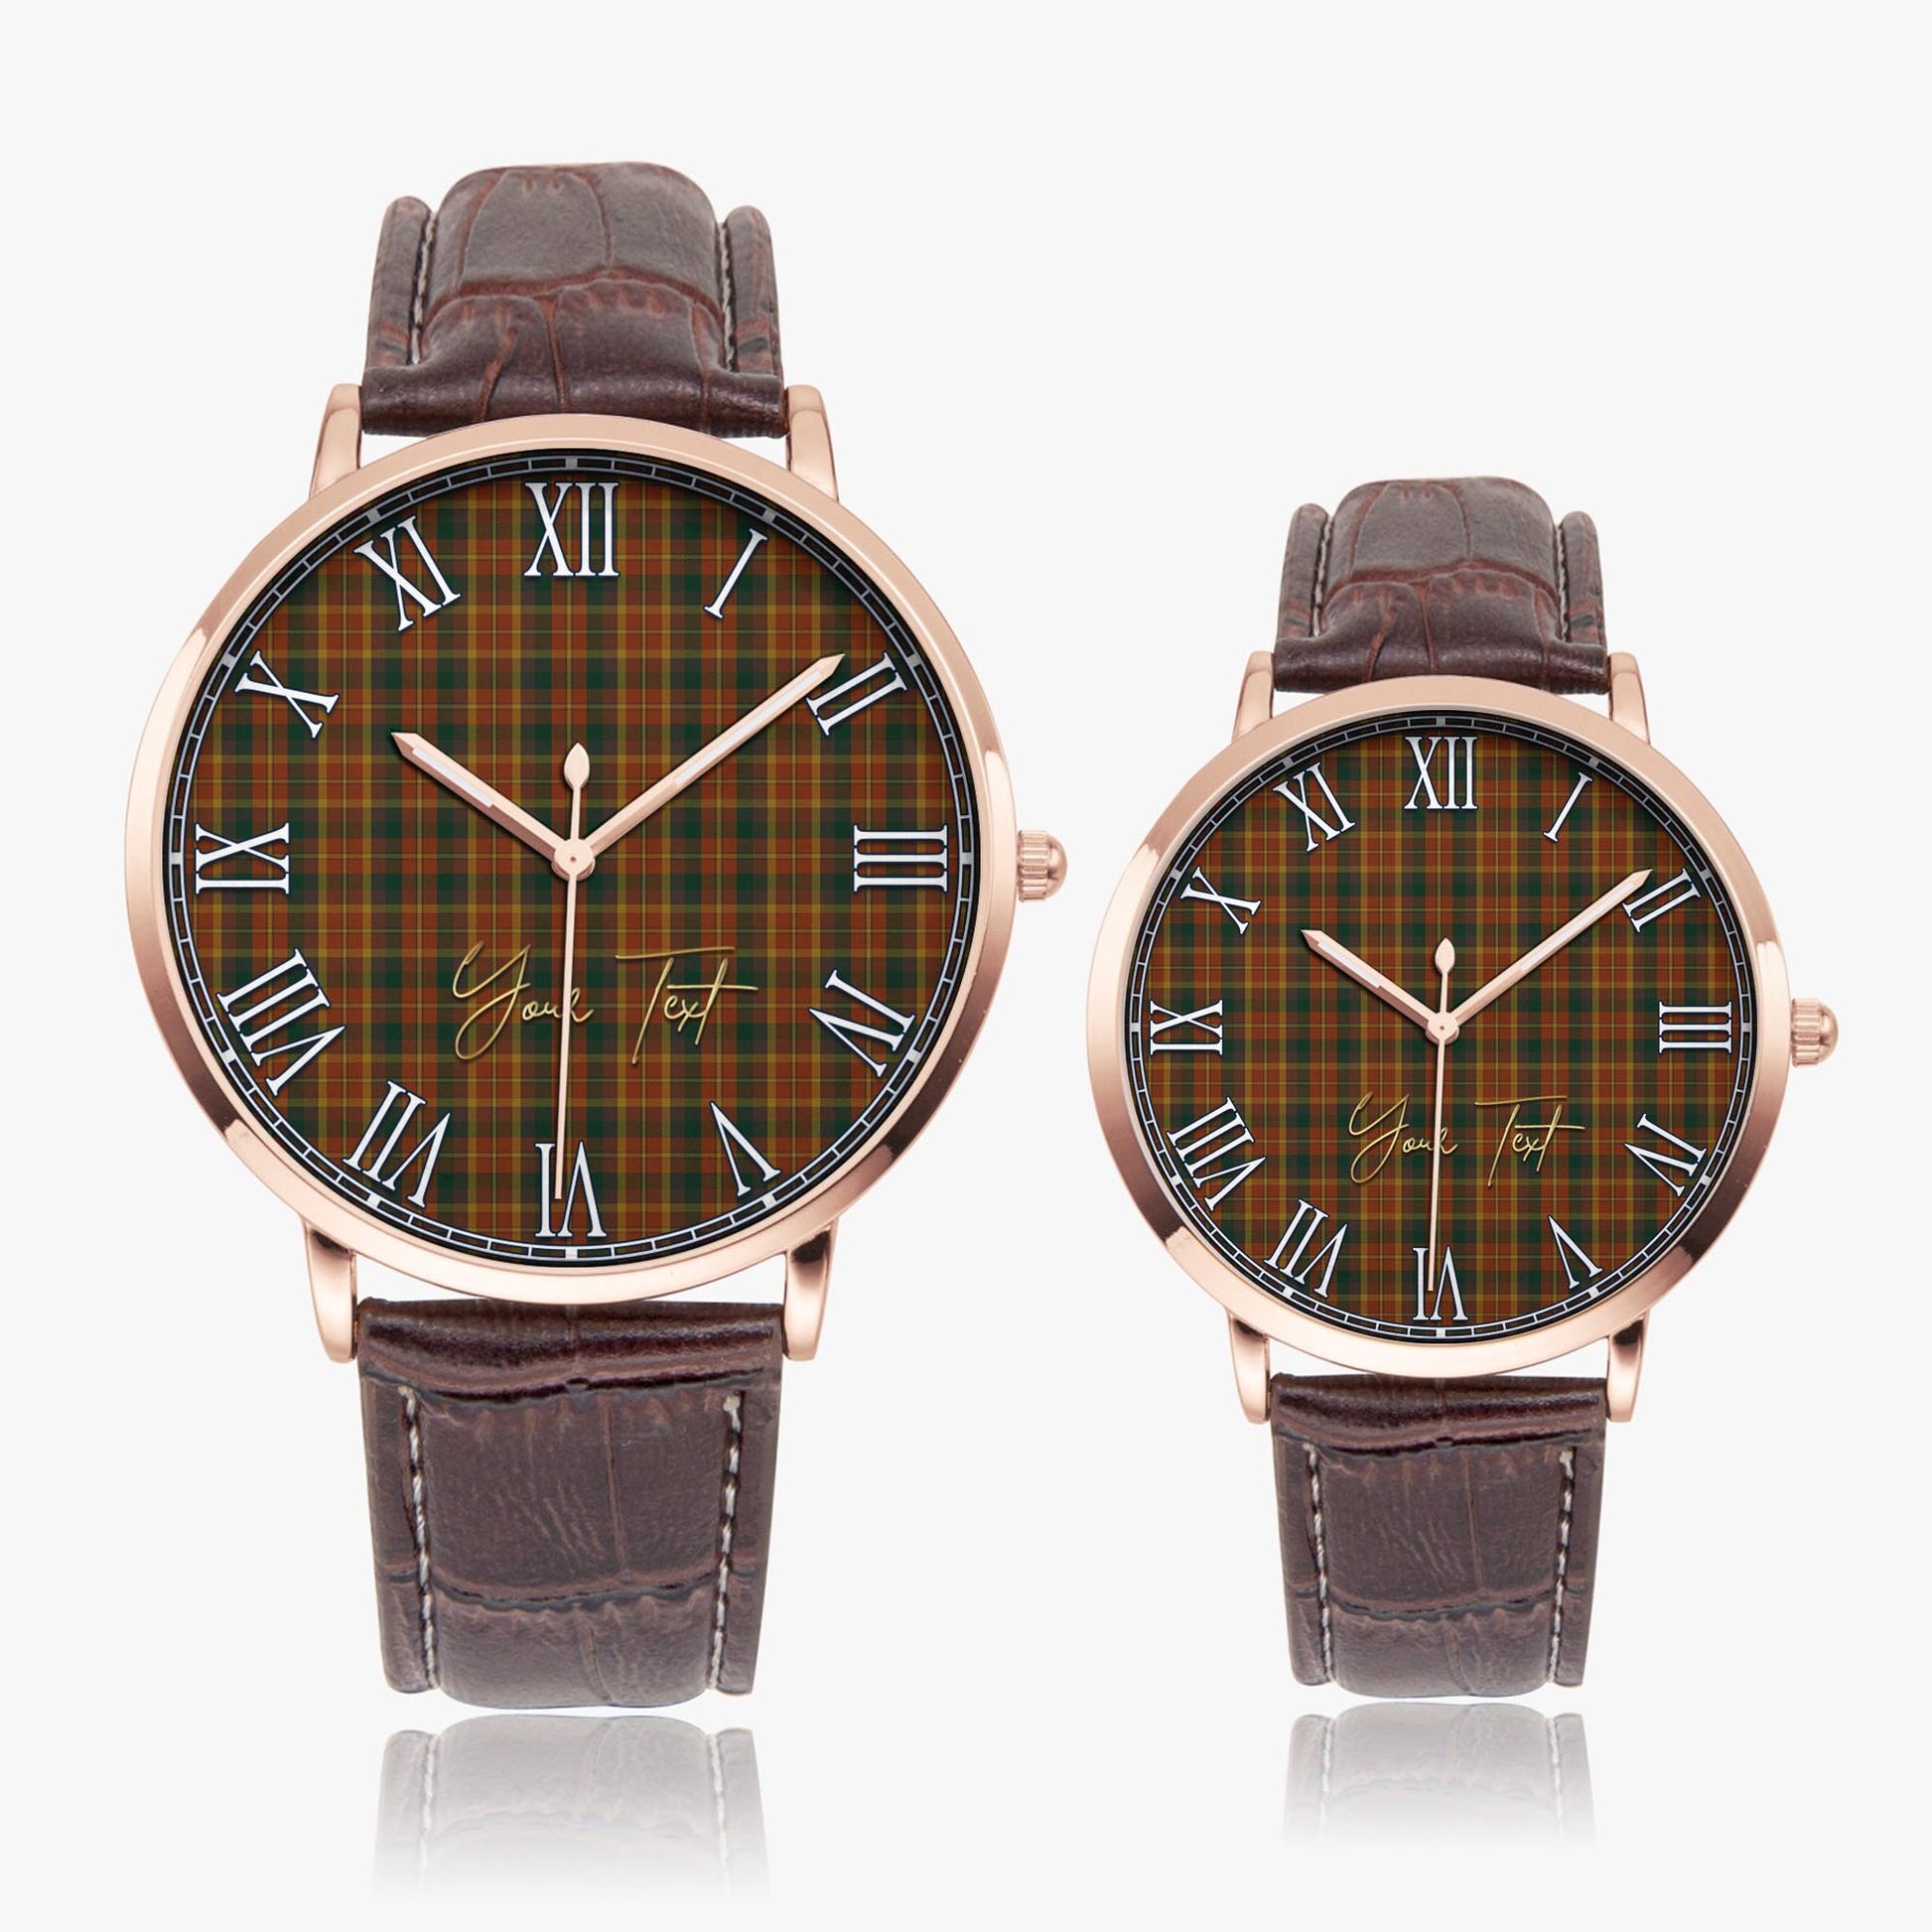 Monaghan County Ireland Tartan Personalized Your Text Leather Trap Quartz Watch Ultra Thin Rose Gold Case With Brown Leather Strap - Tartanvibesclothing